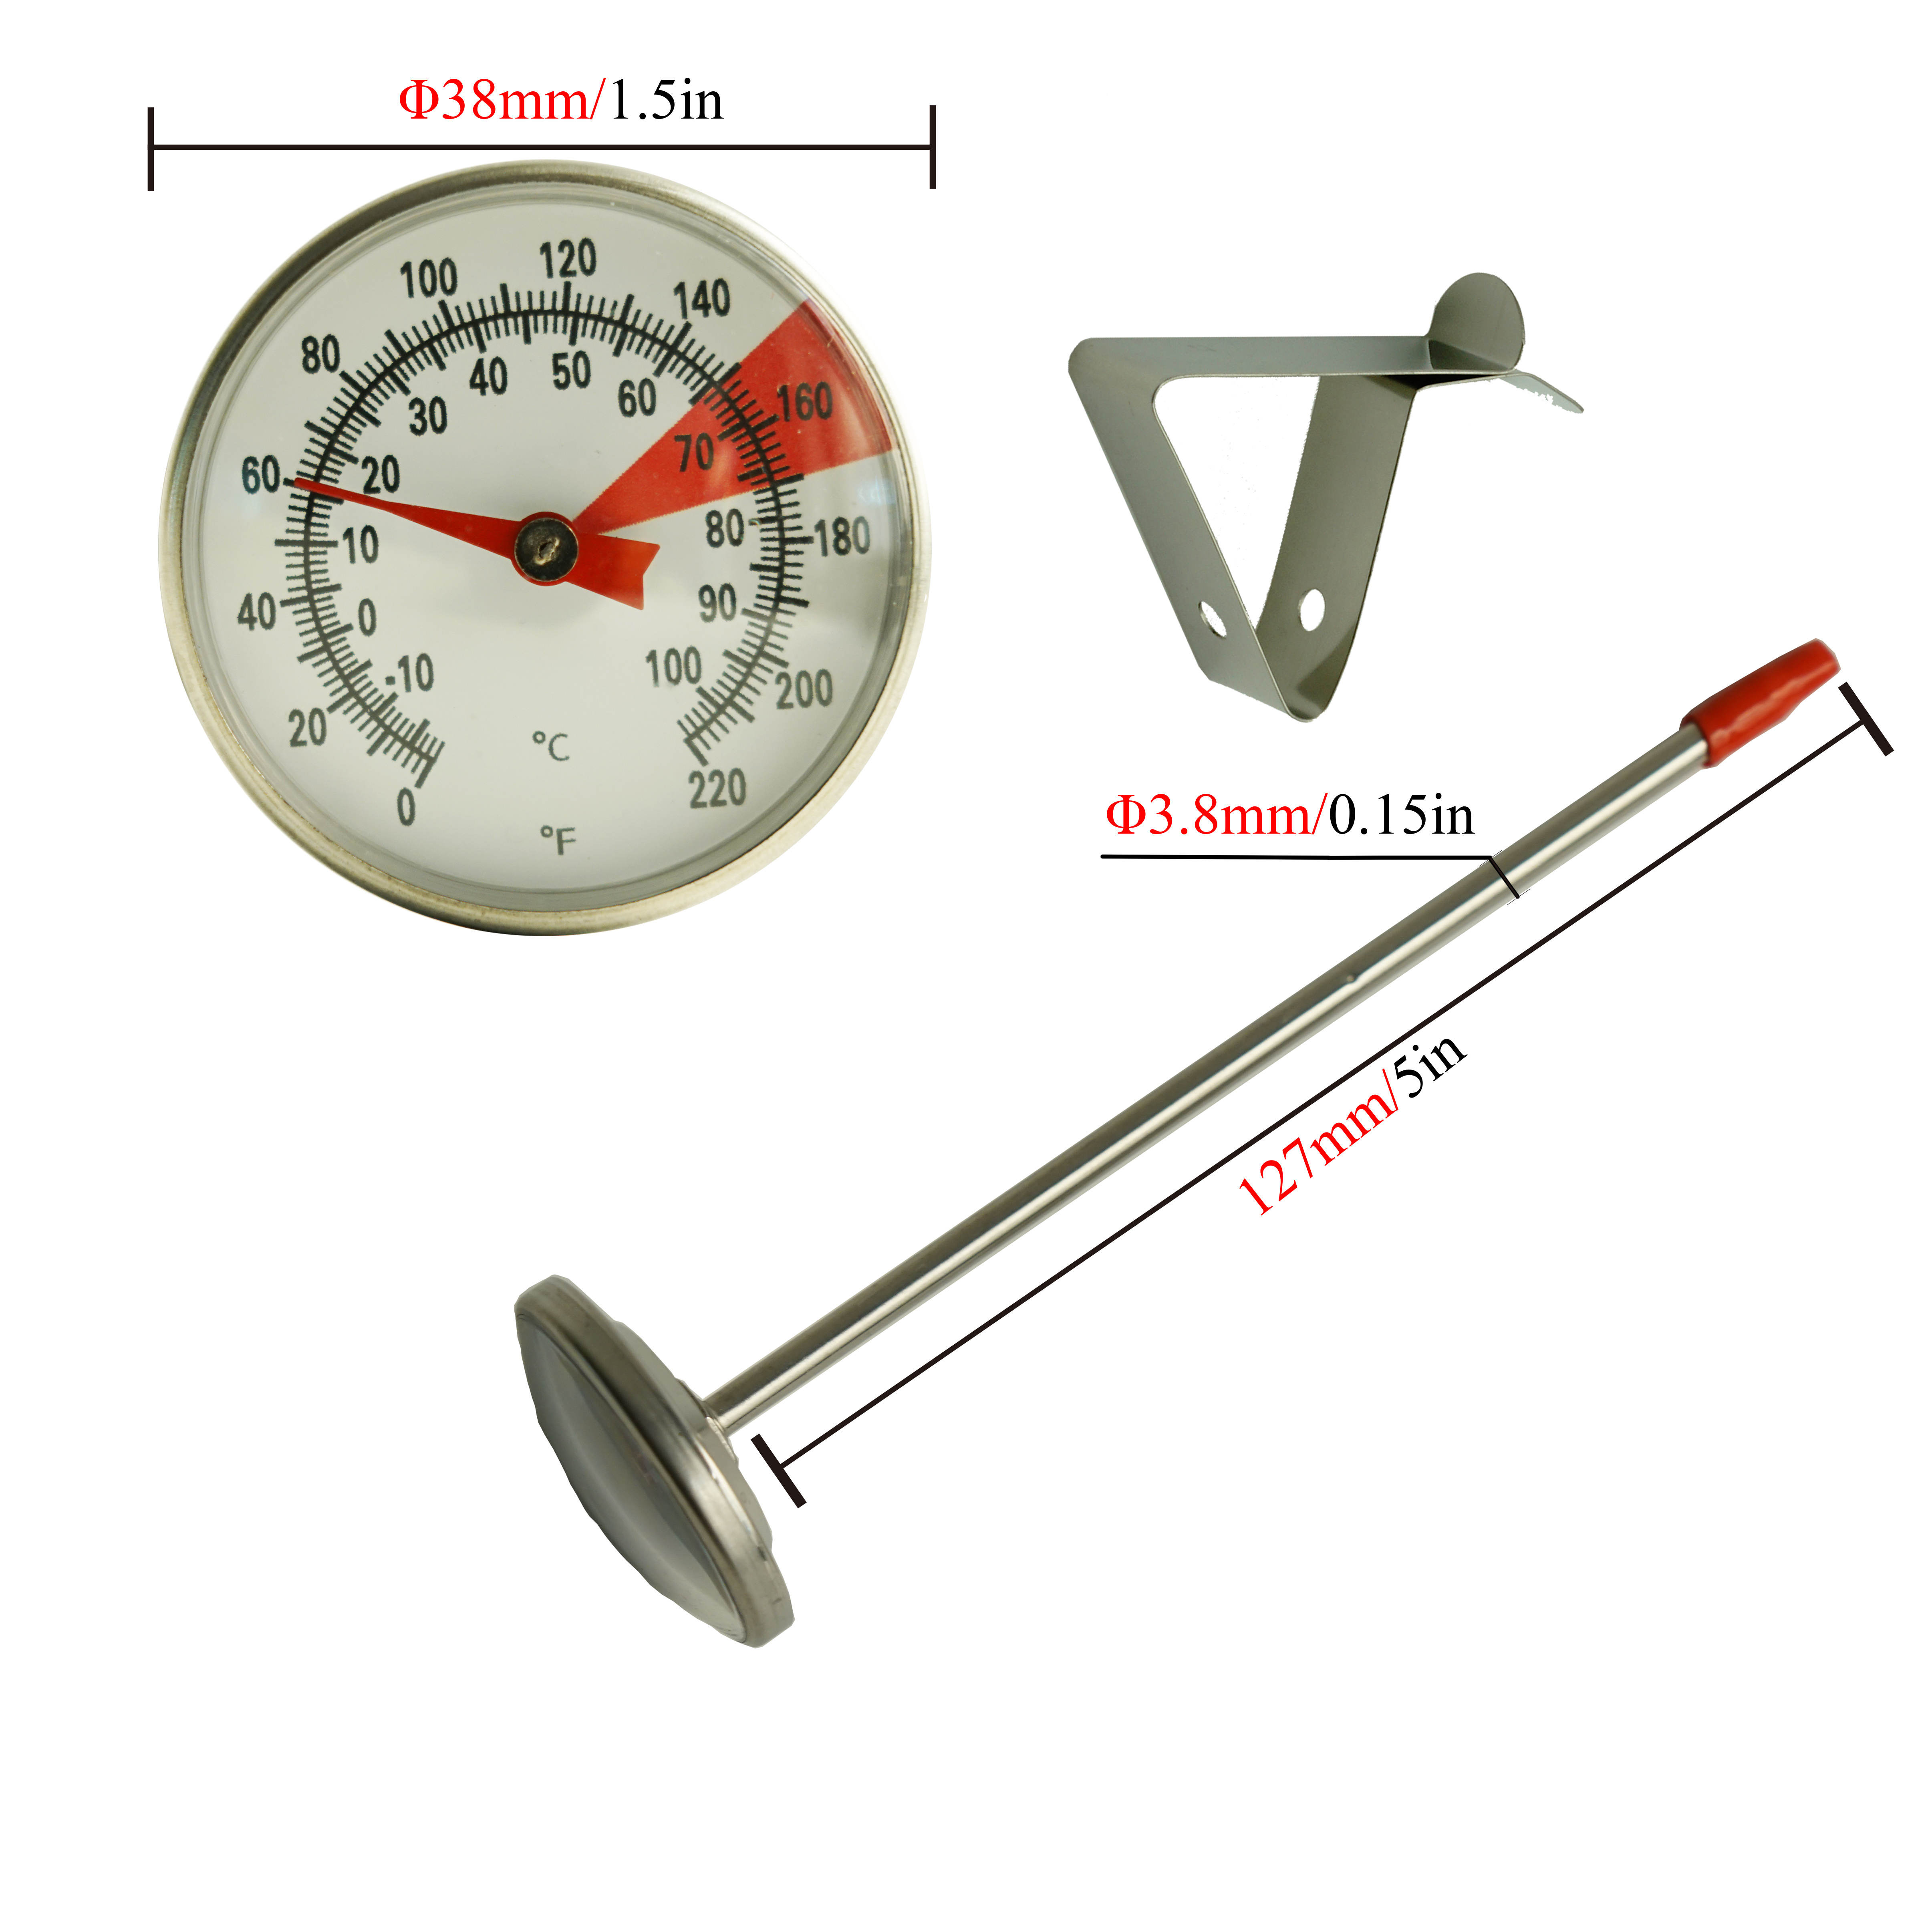 Precise Stainless Steel Coffee Thermometer With Clipable Pointer